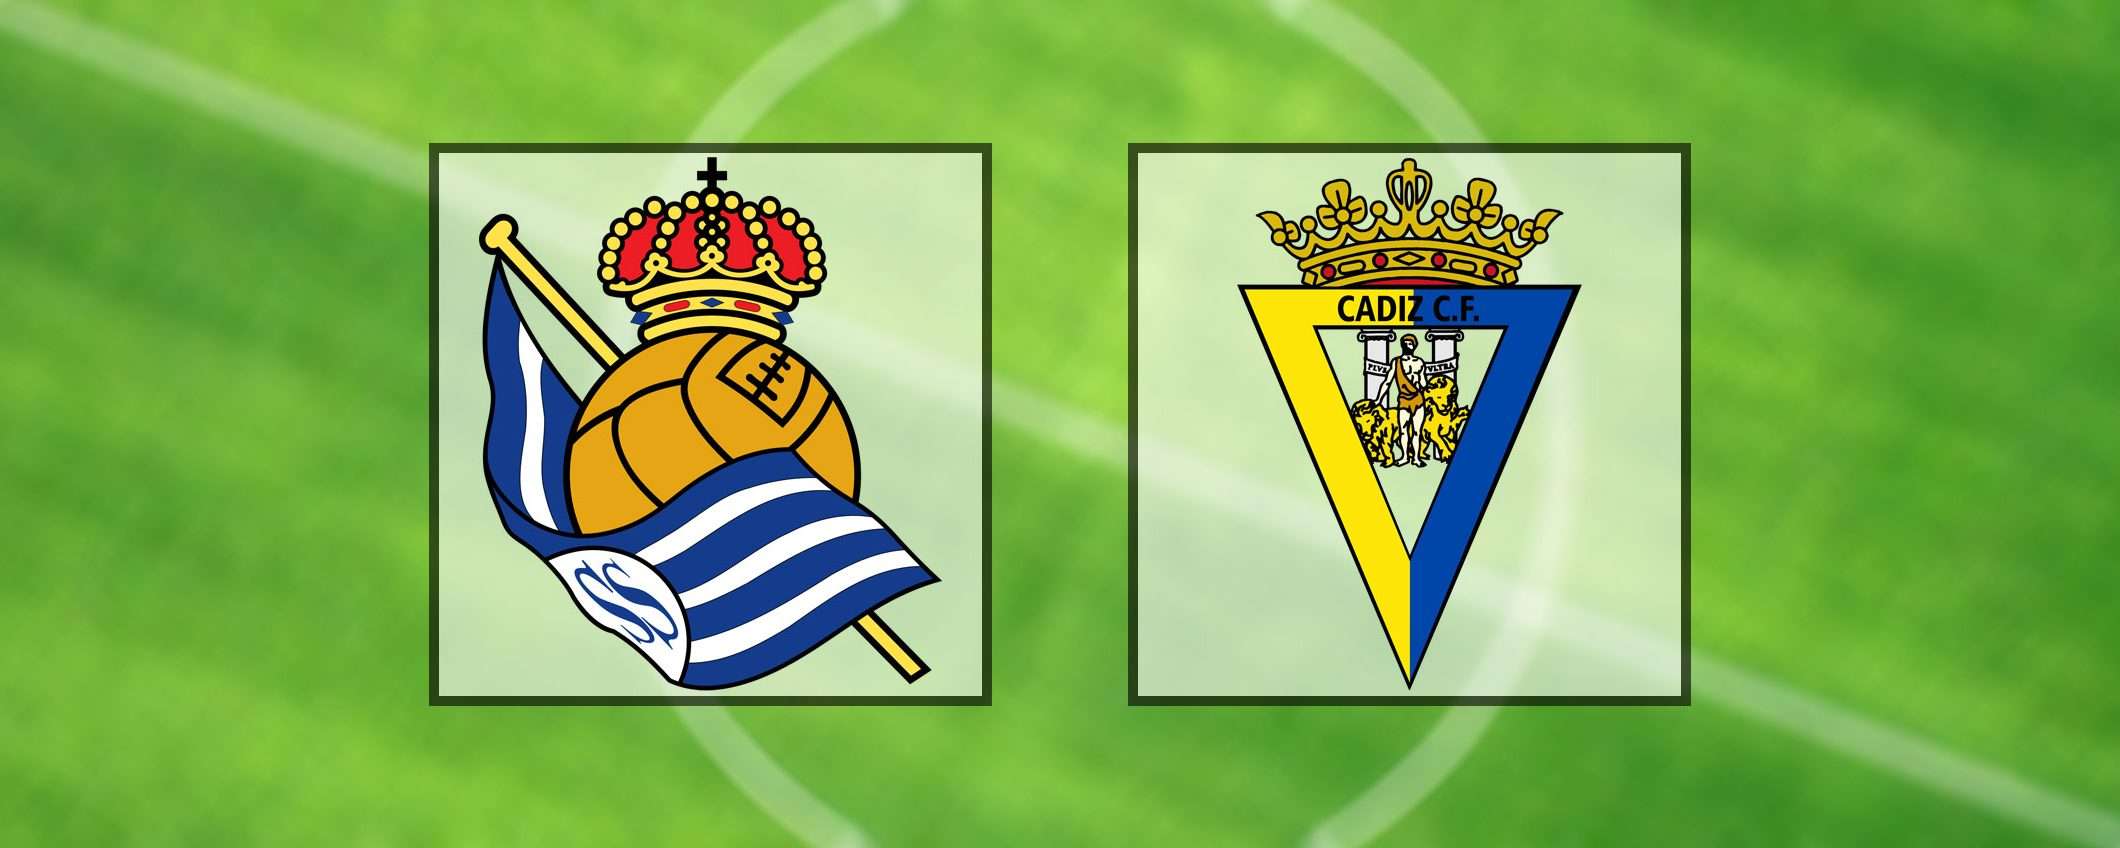 Come vedere Real Sociedad-Cadice in streaming